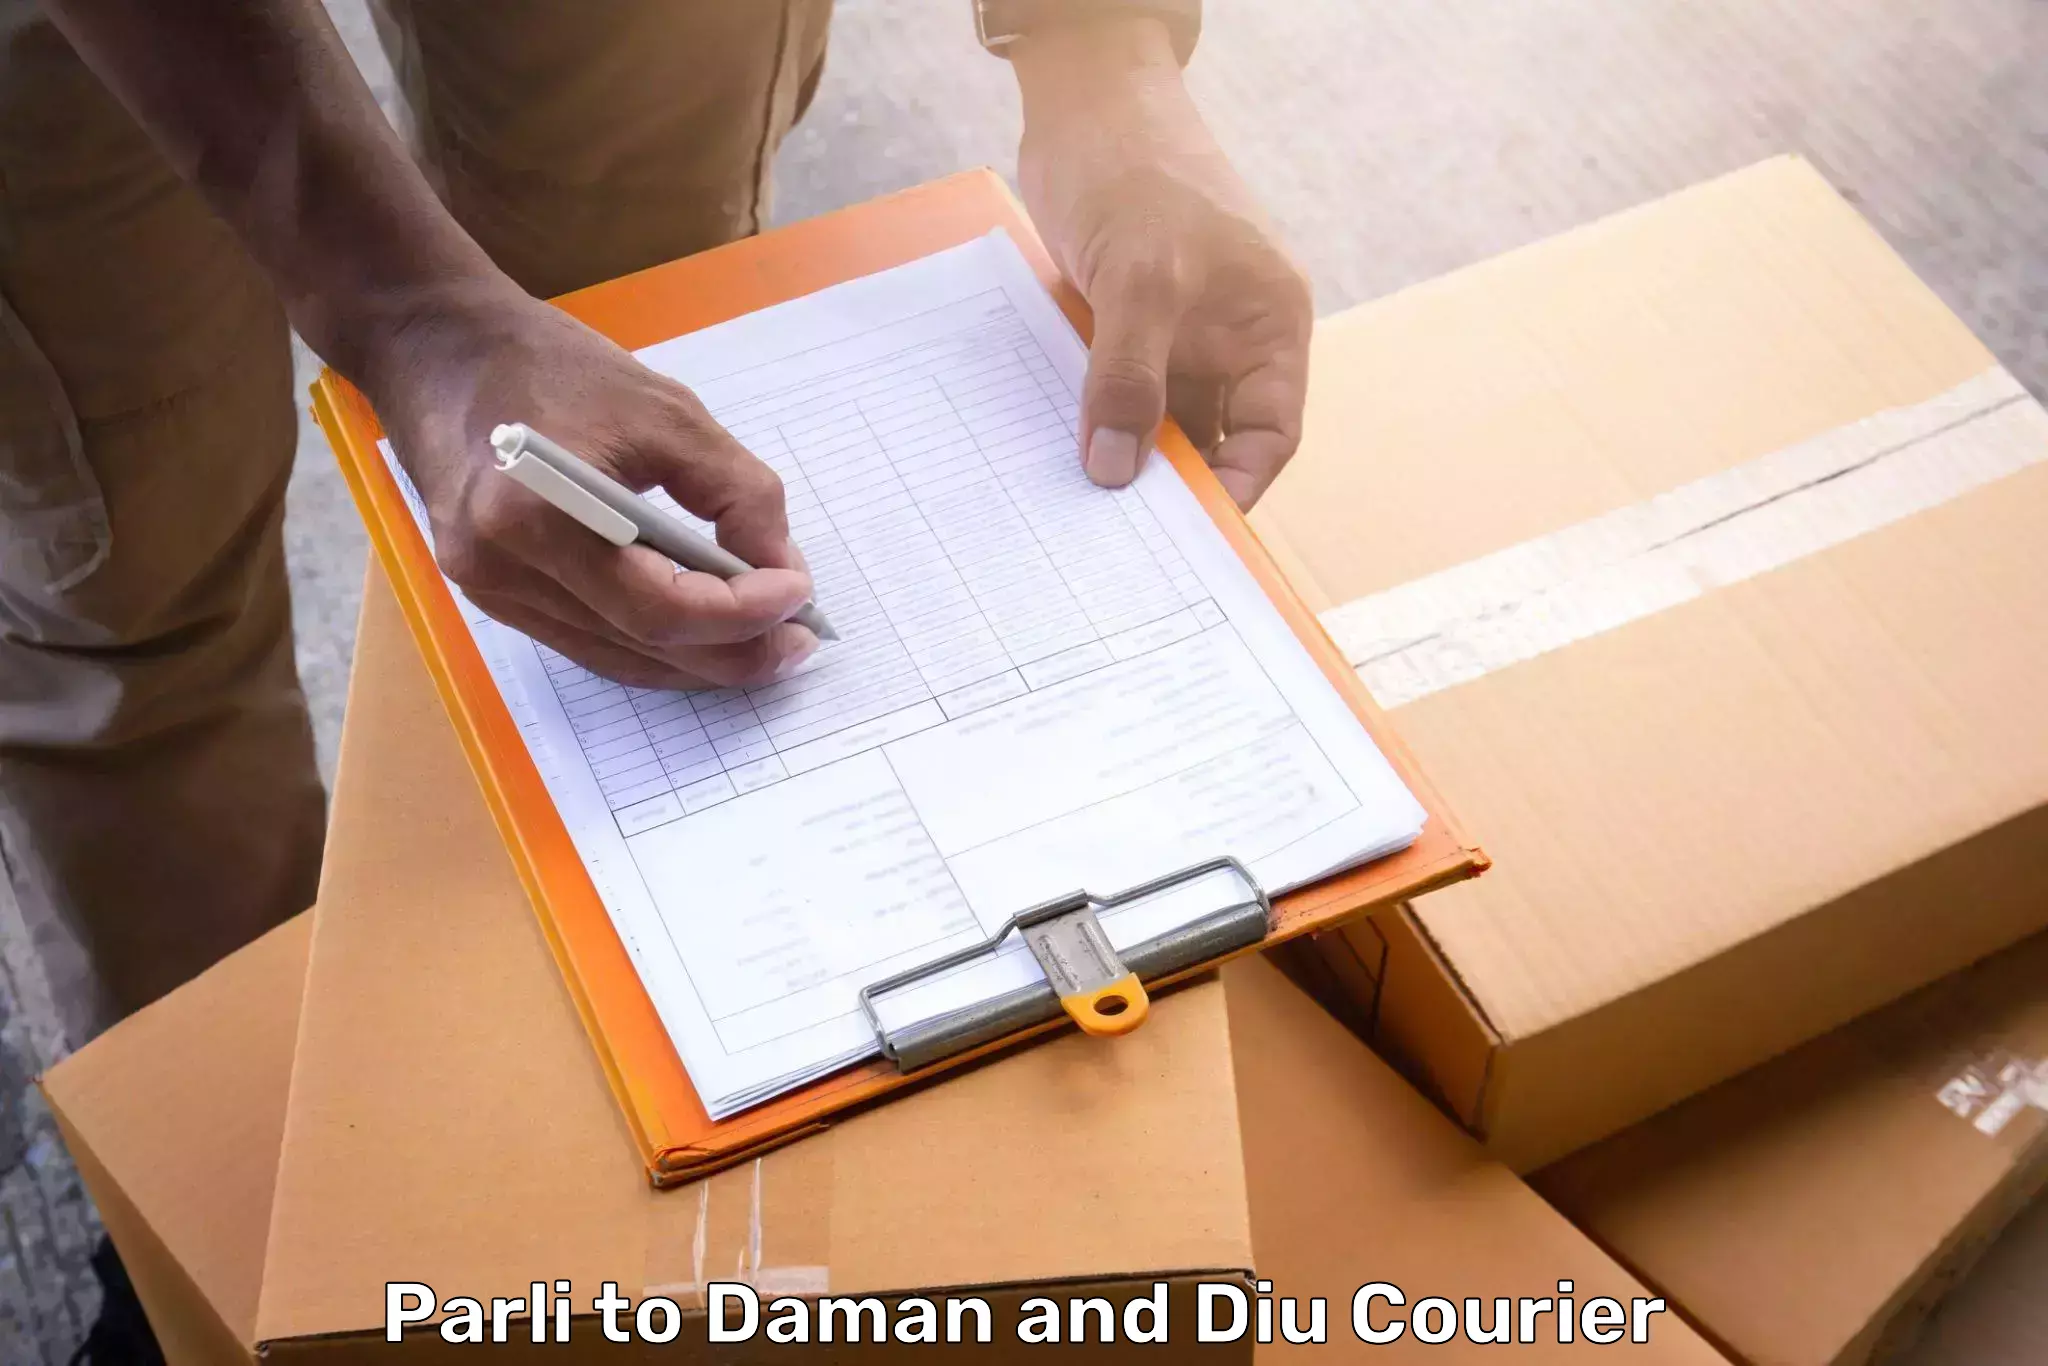 Online luggage shipping booking Parli to Diu